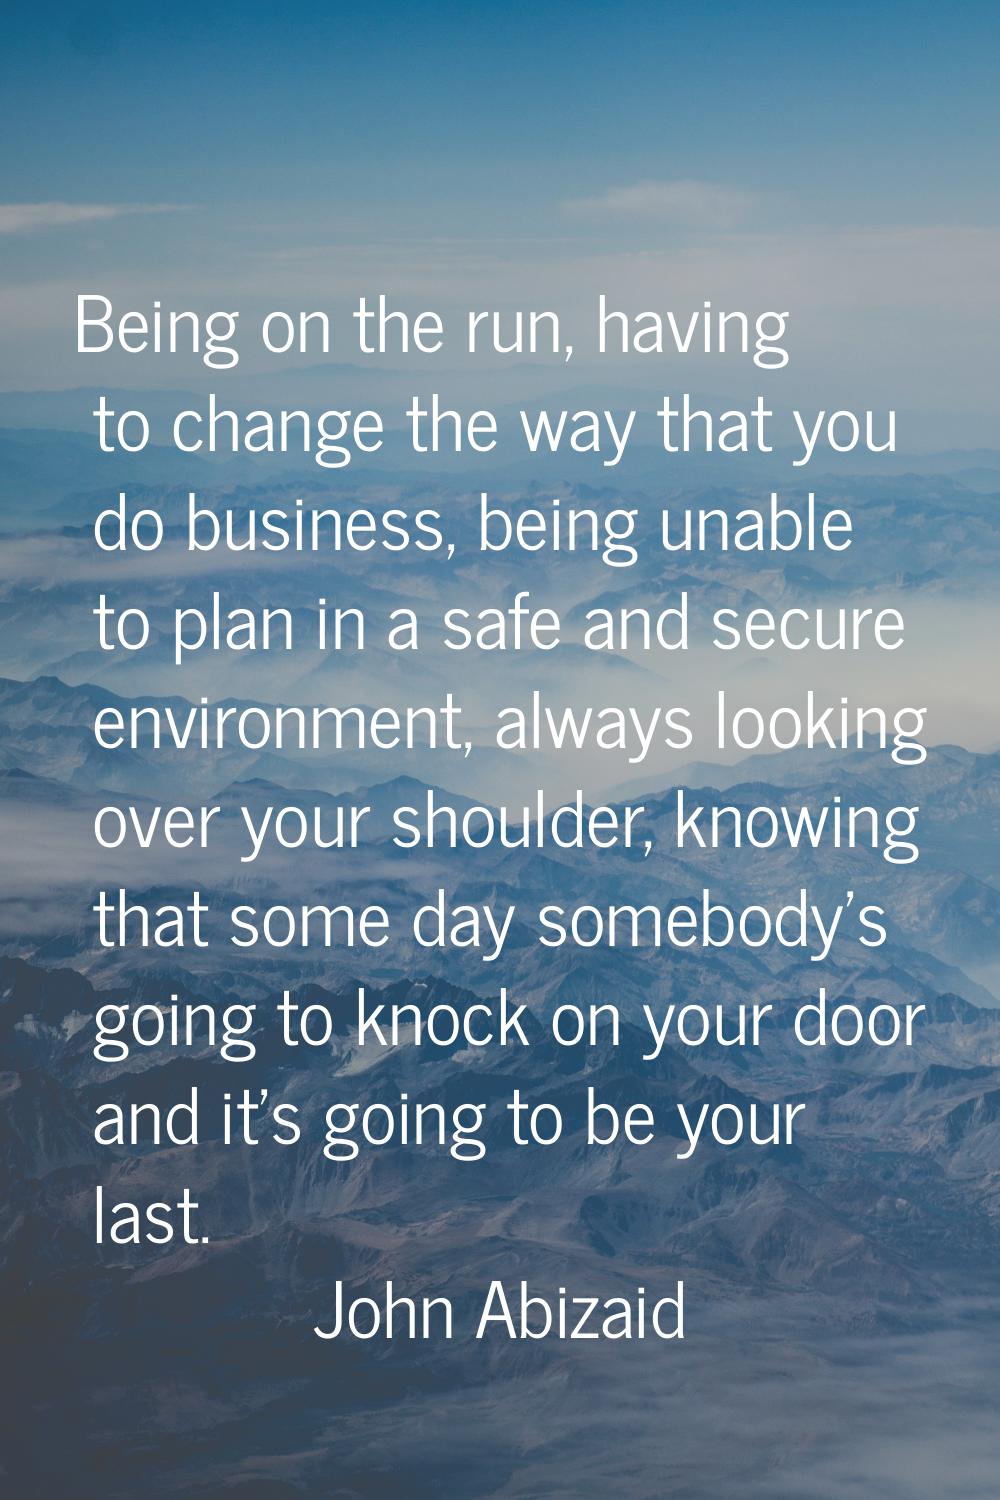 Being on the run, having to change the way that you do business, being unable to plan in a safe and